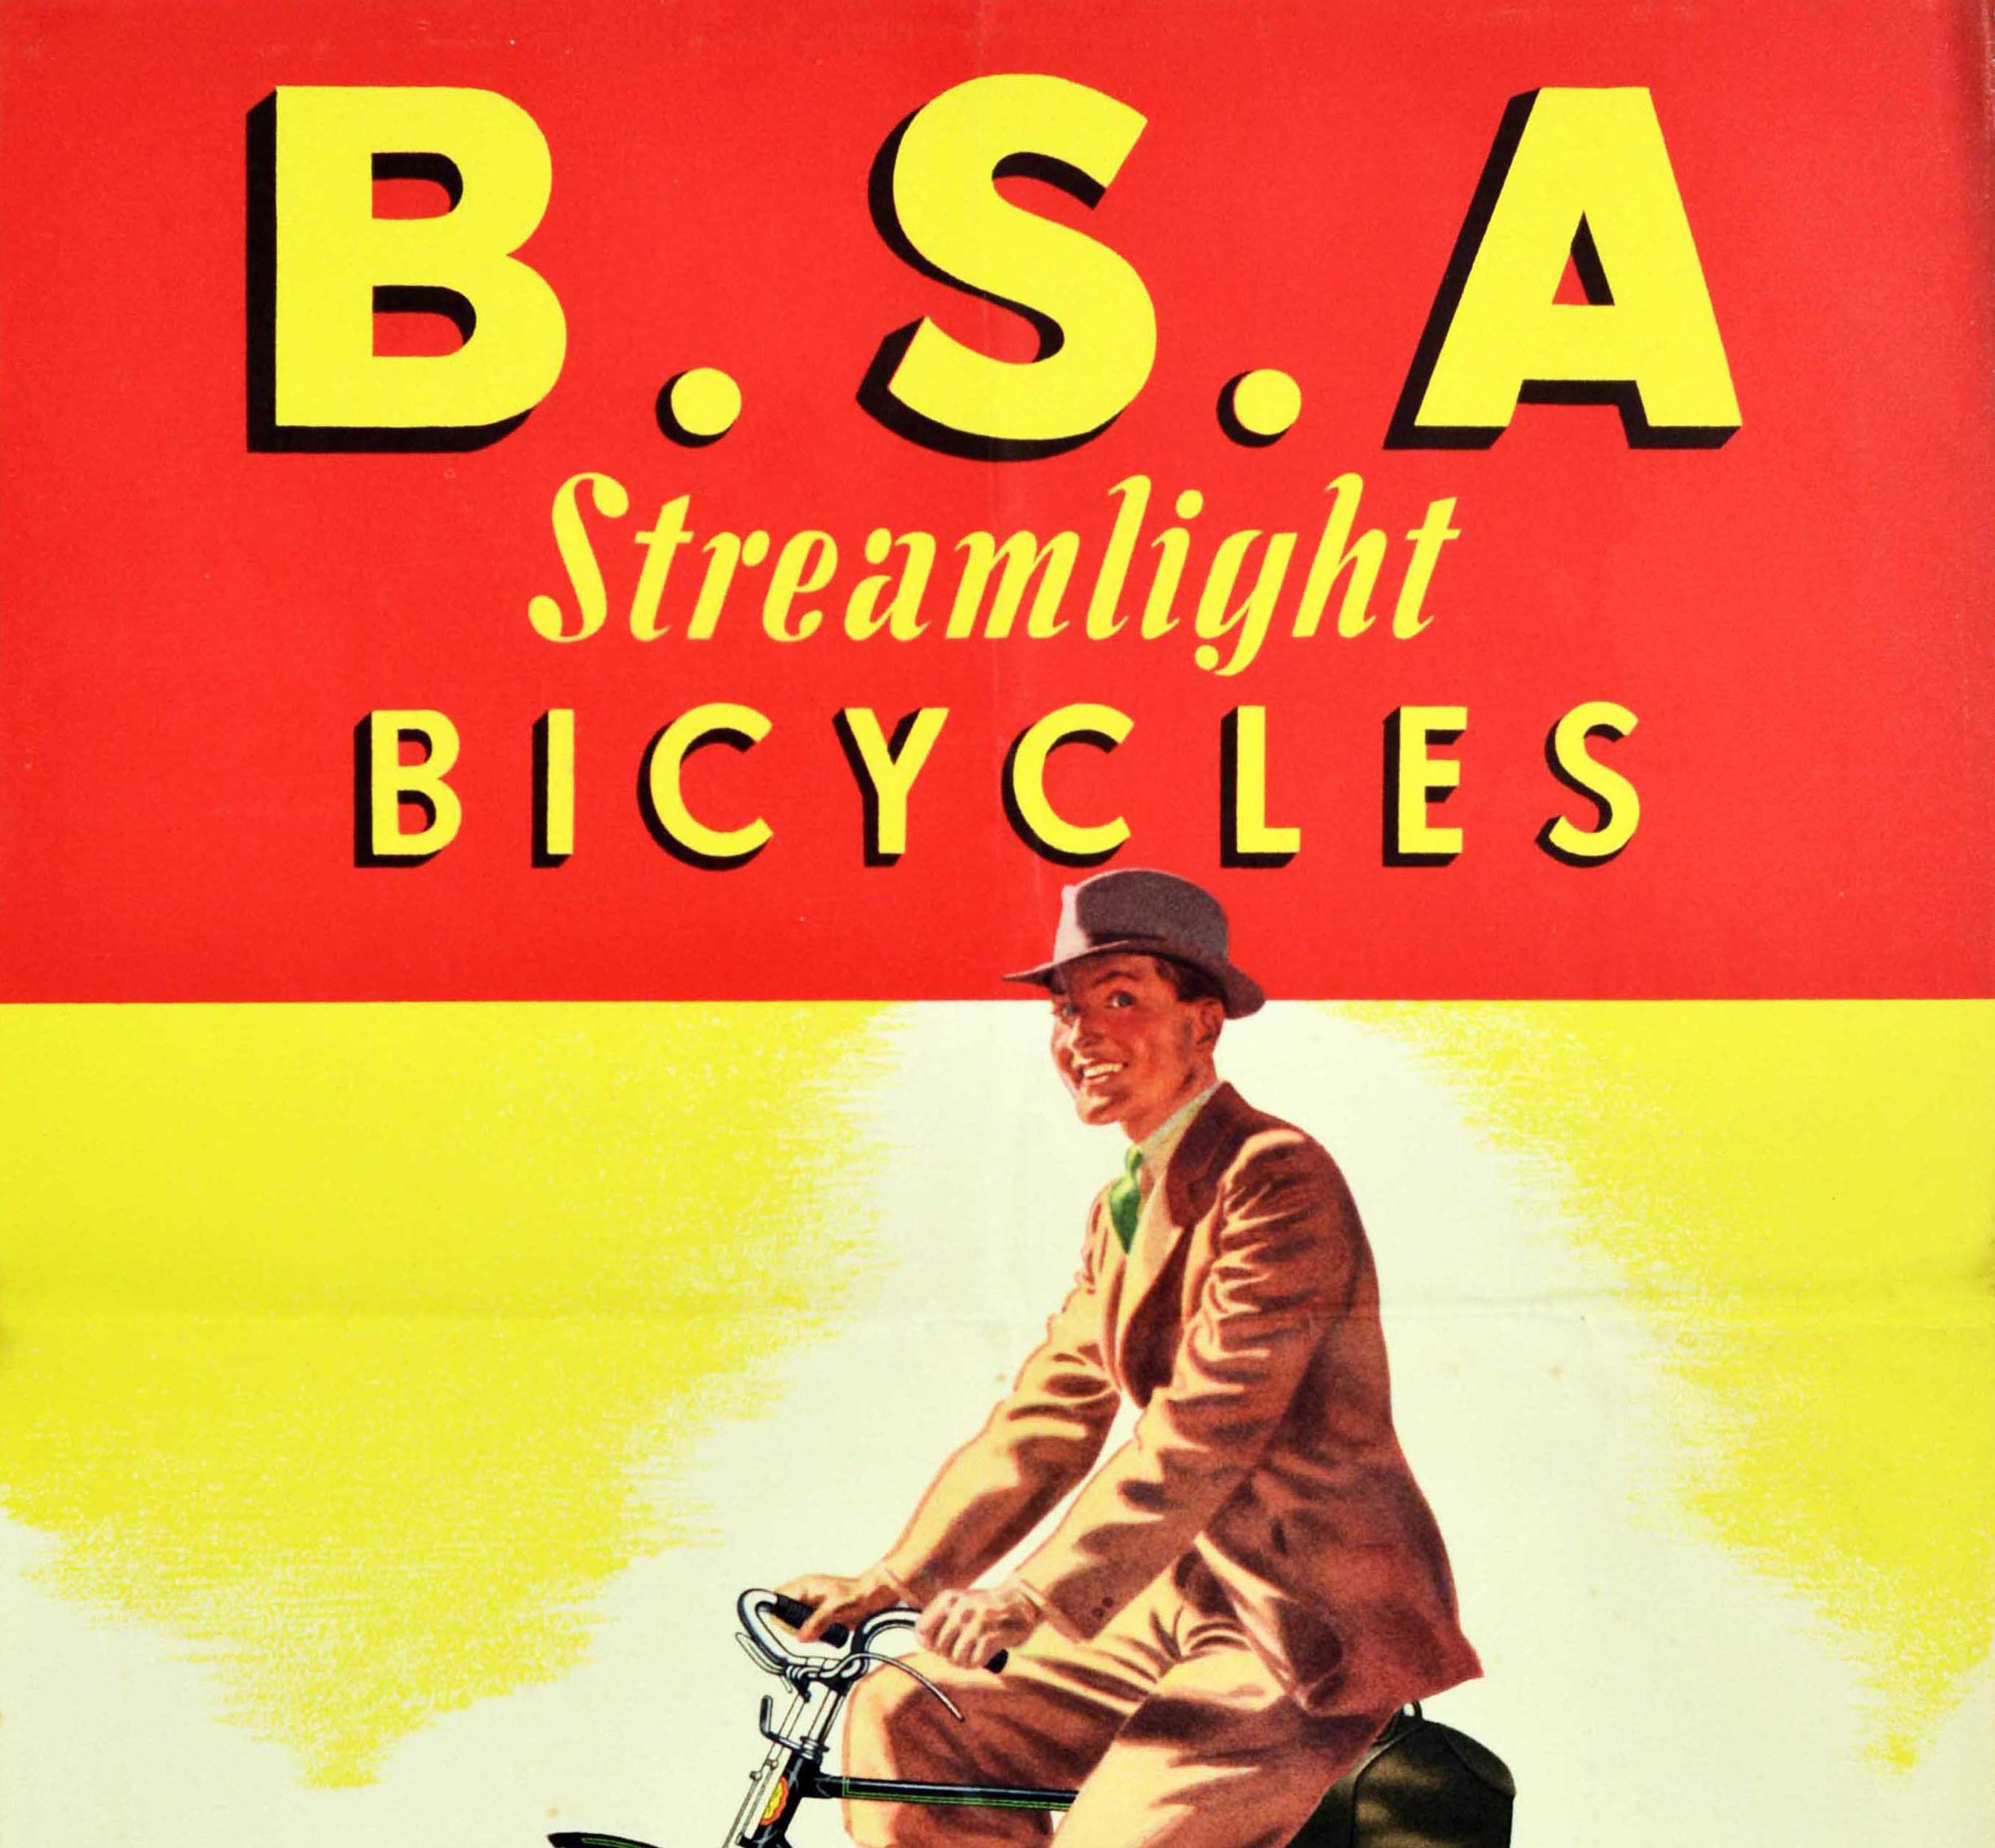 British Original Vintage Advertising Poster BSA Steamlight Bicycles Cycling Design Art For Sale